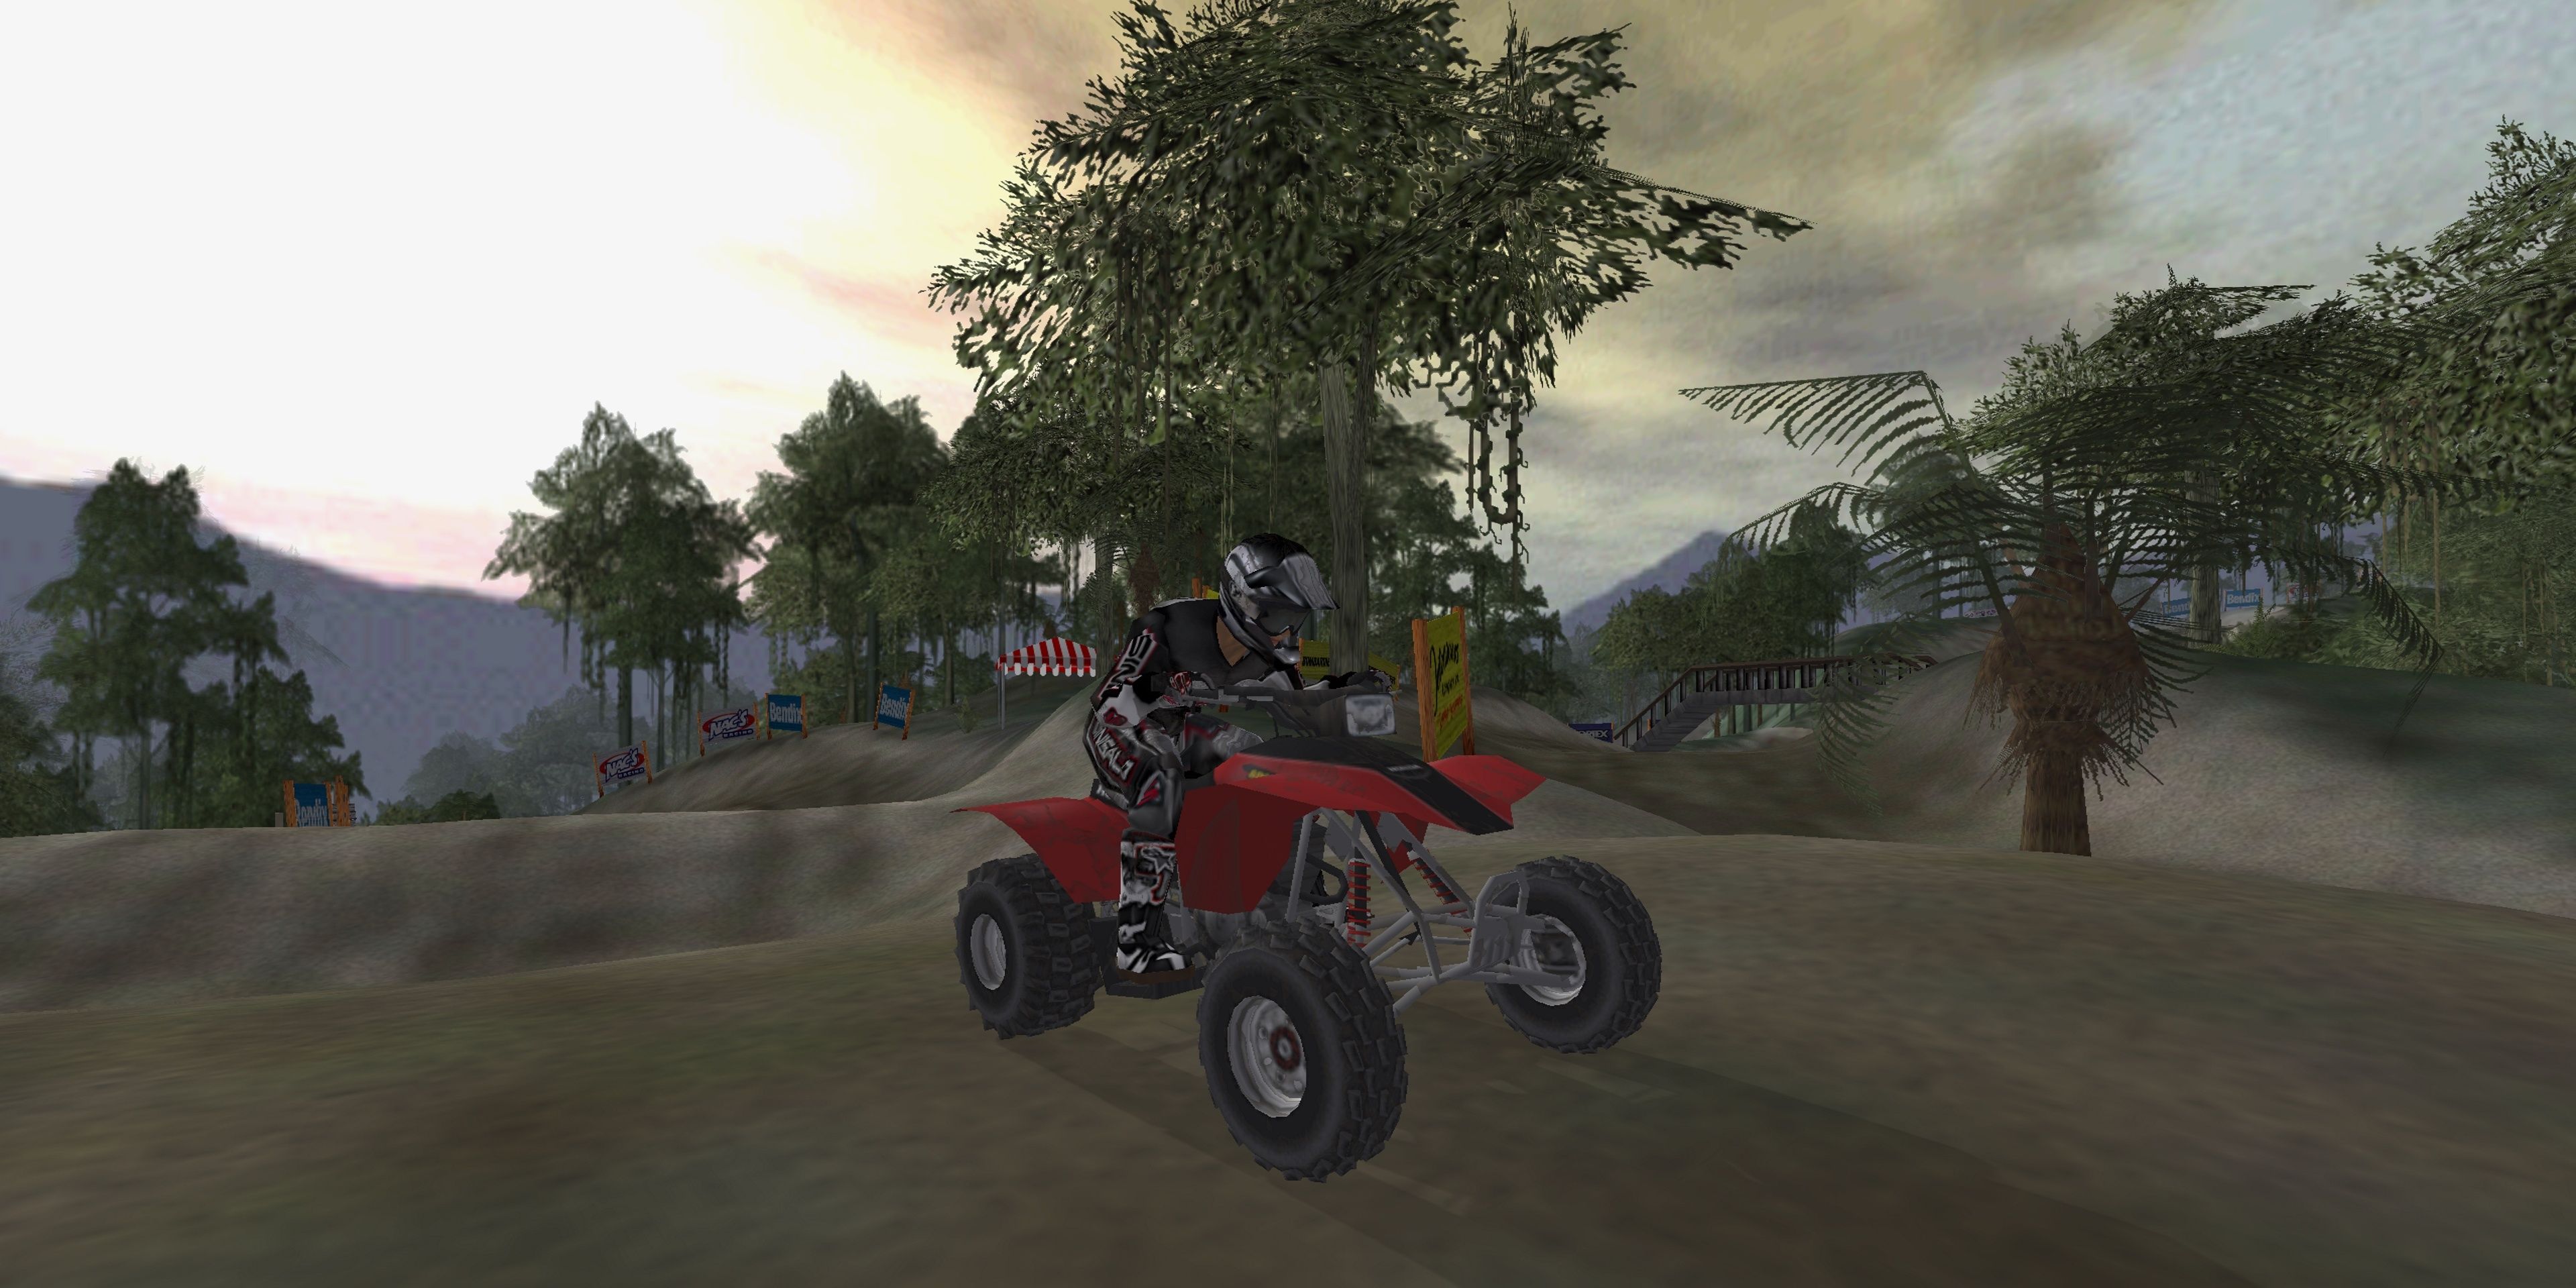 ATV Offroad Fury 2 PS2 Playstation 2 Game Racing red at sunset 